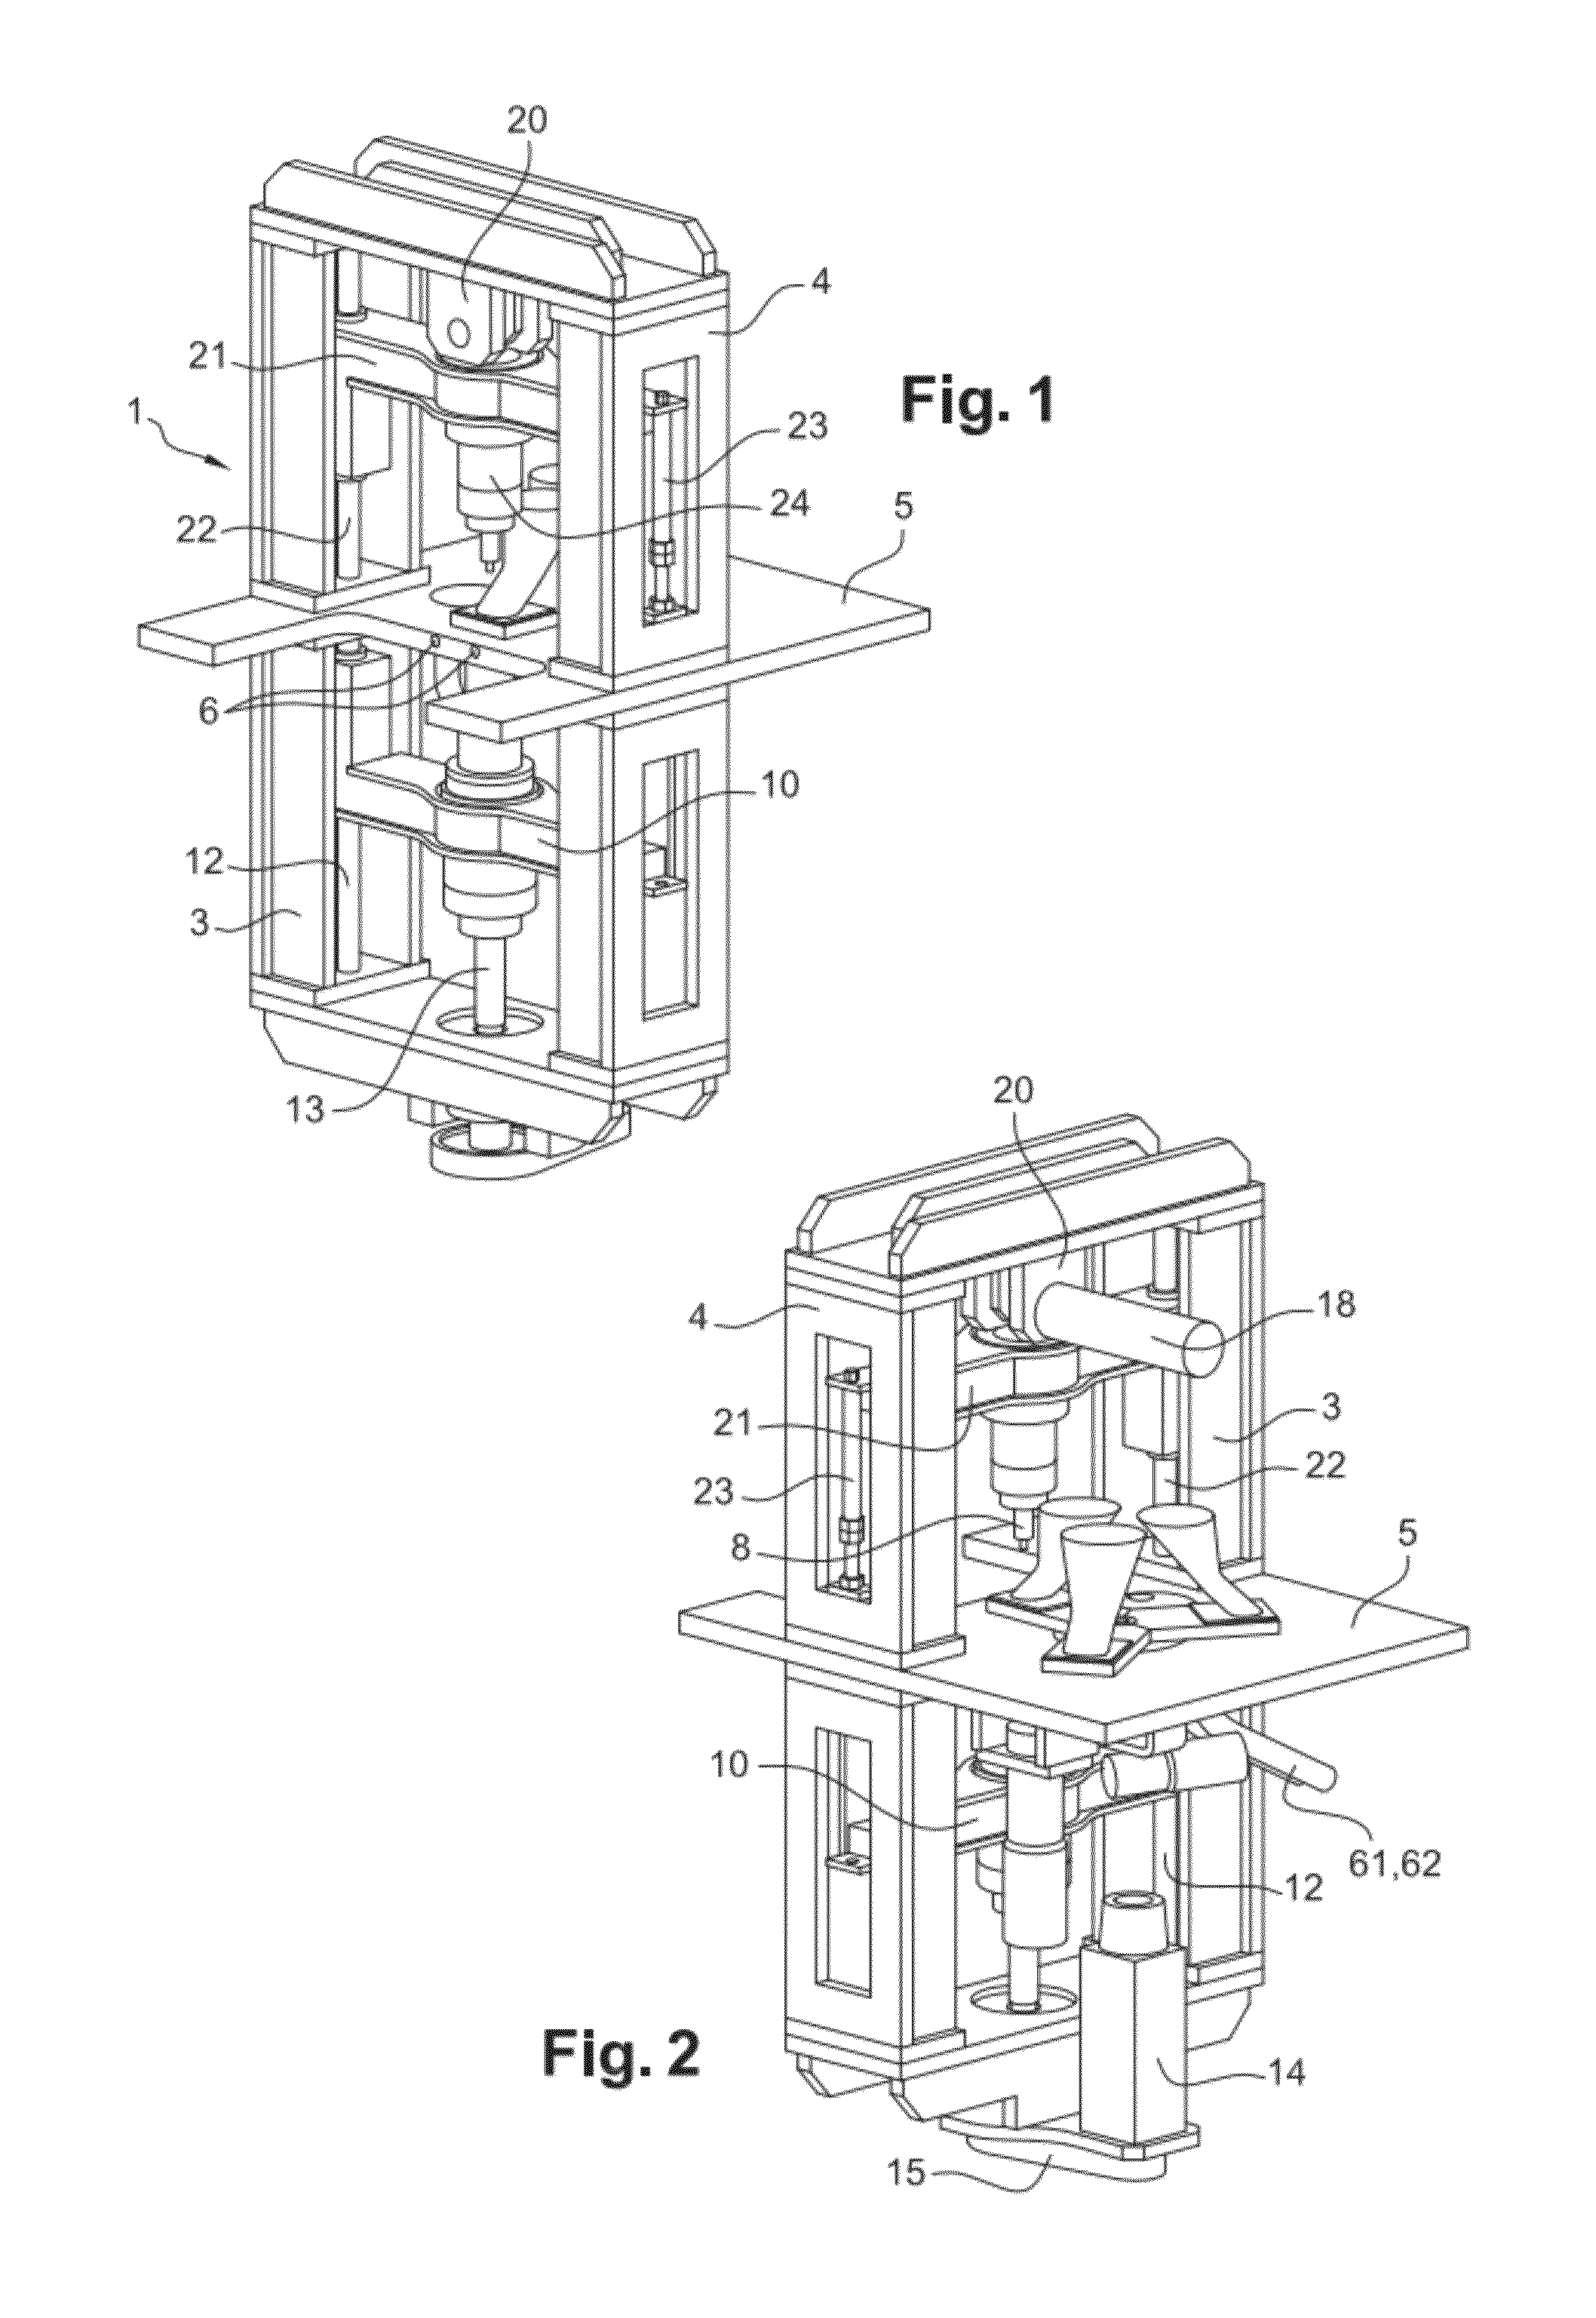 Facility for producing a solid product using one or more powder materials